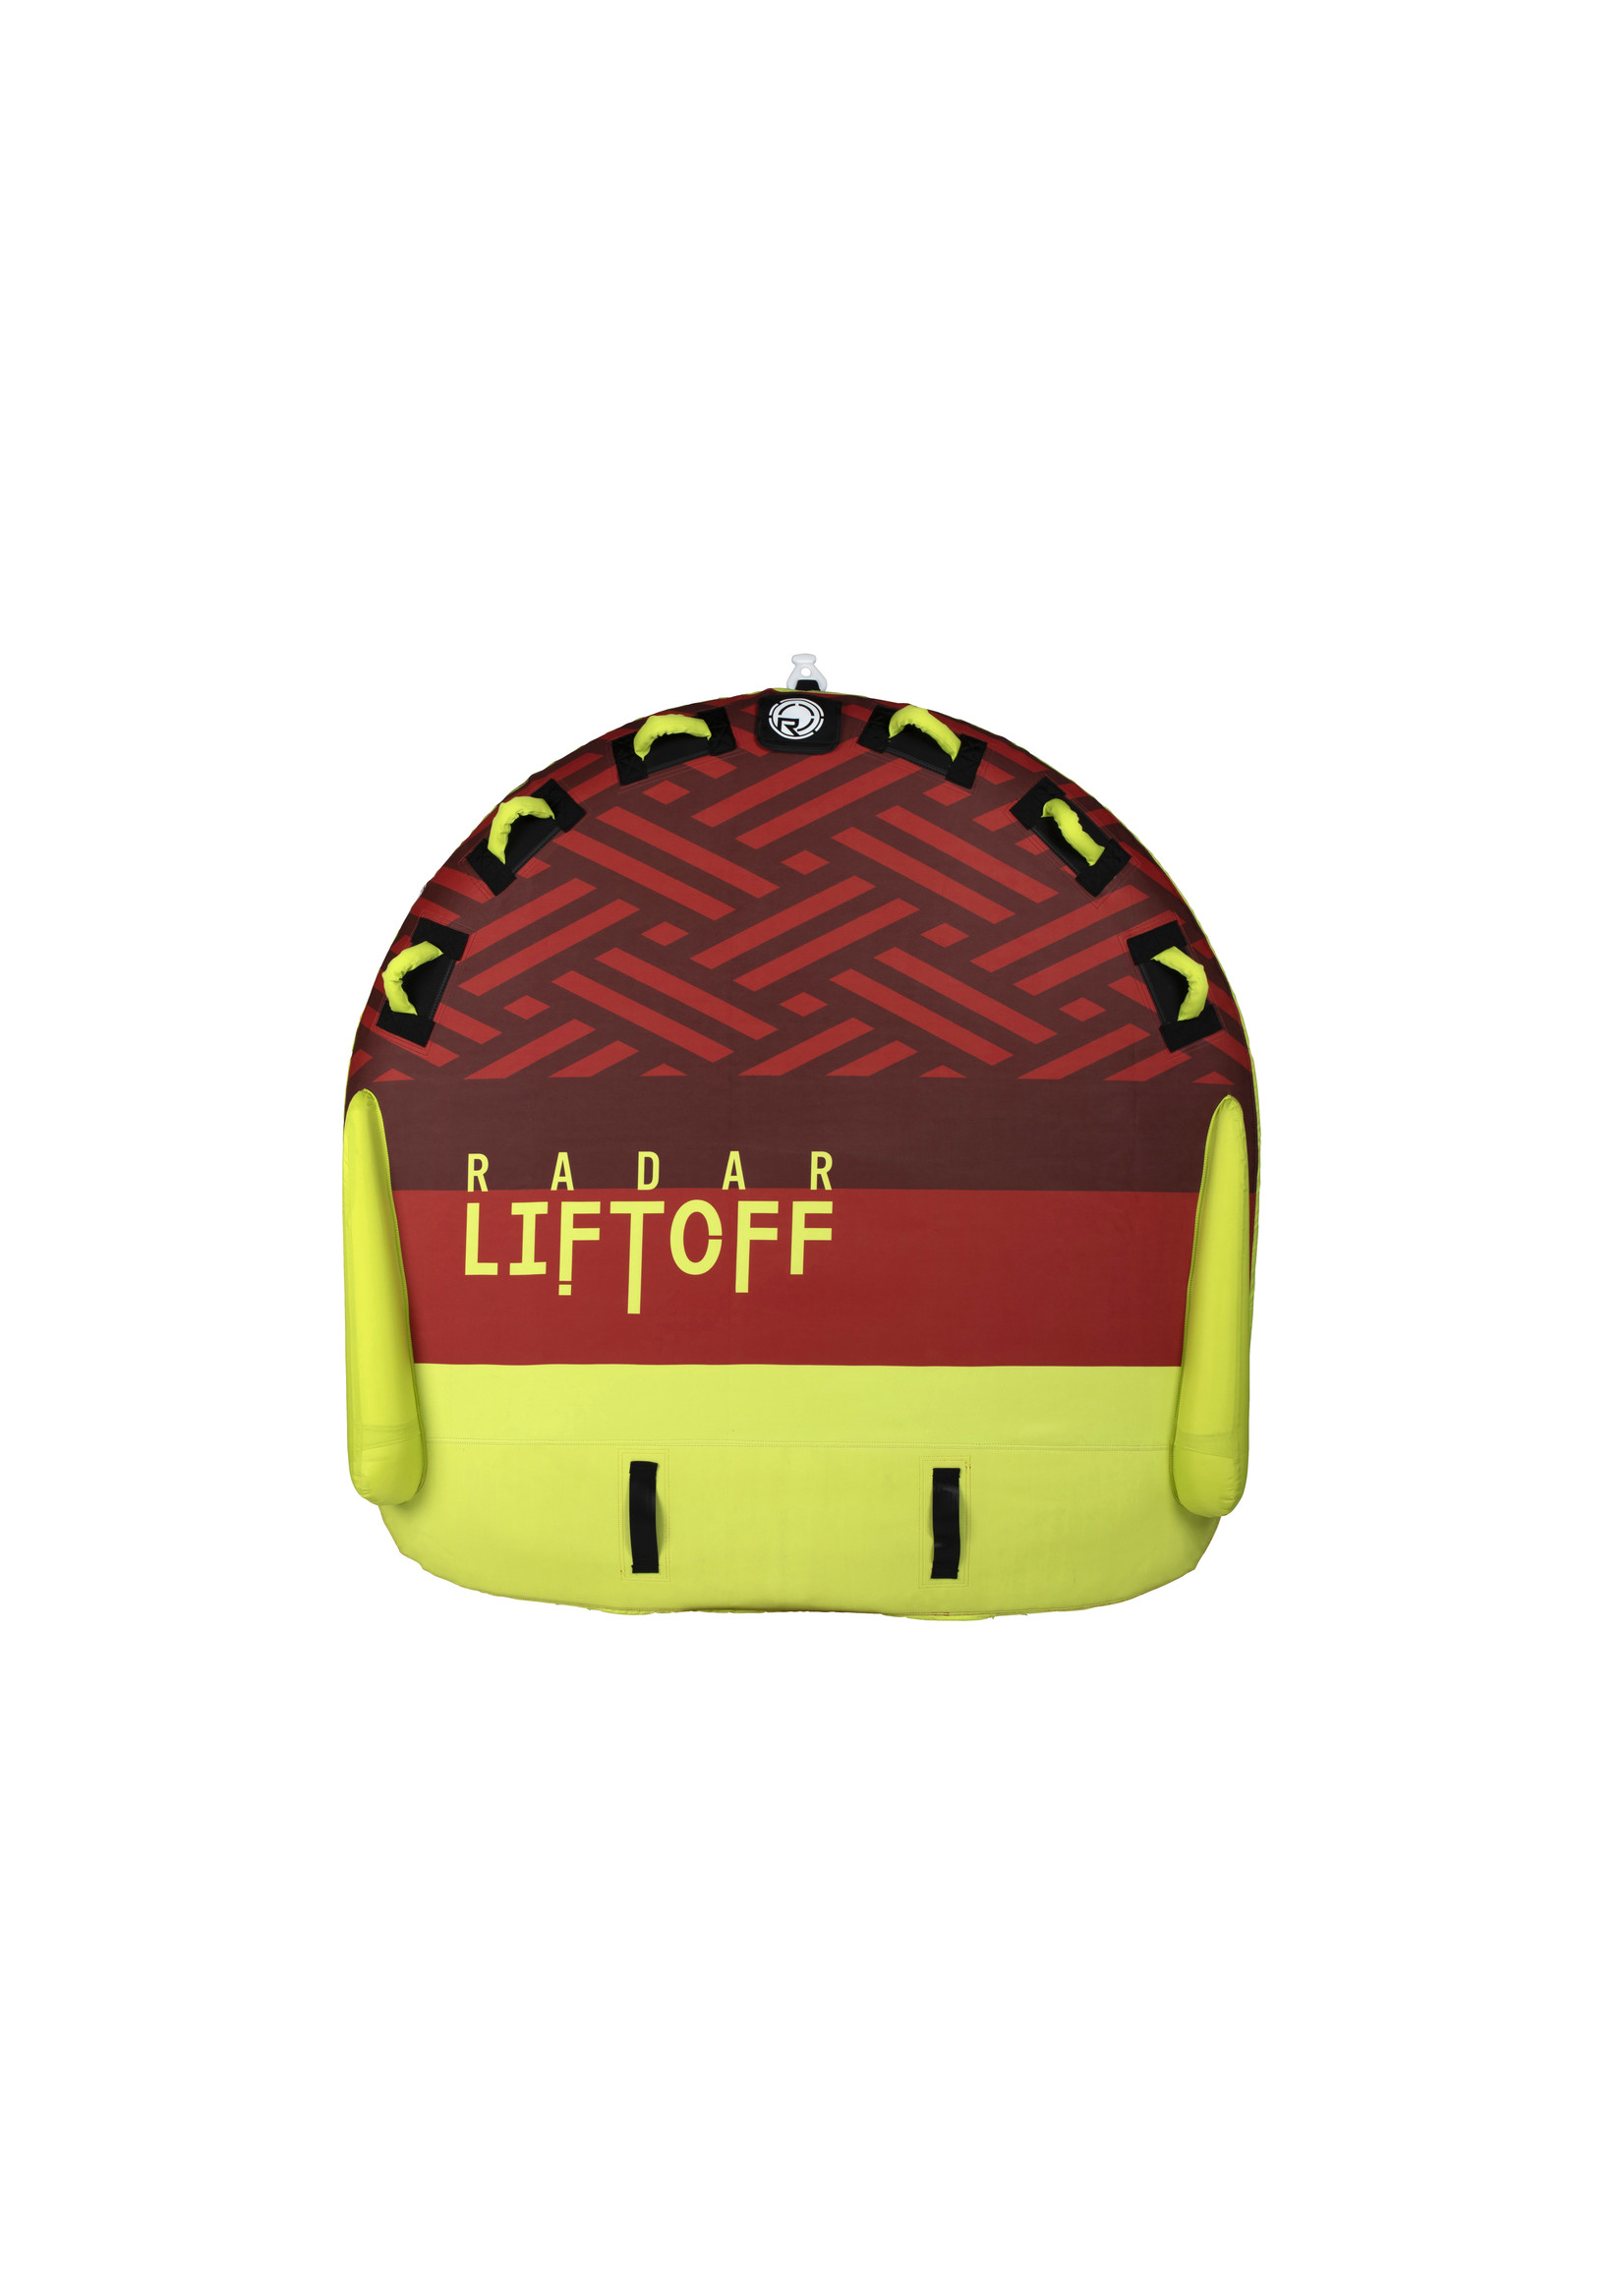 Liftoff - Marshmallow Top - Red / Yellow - 3 Person Tube